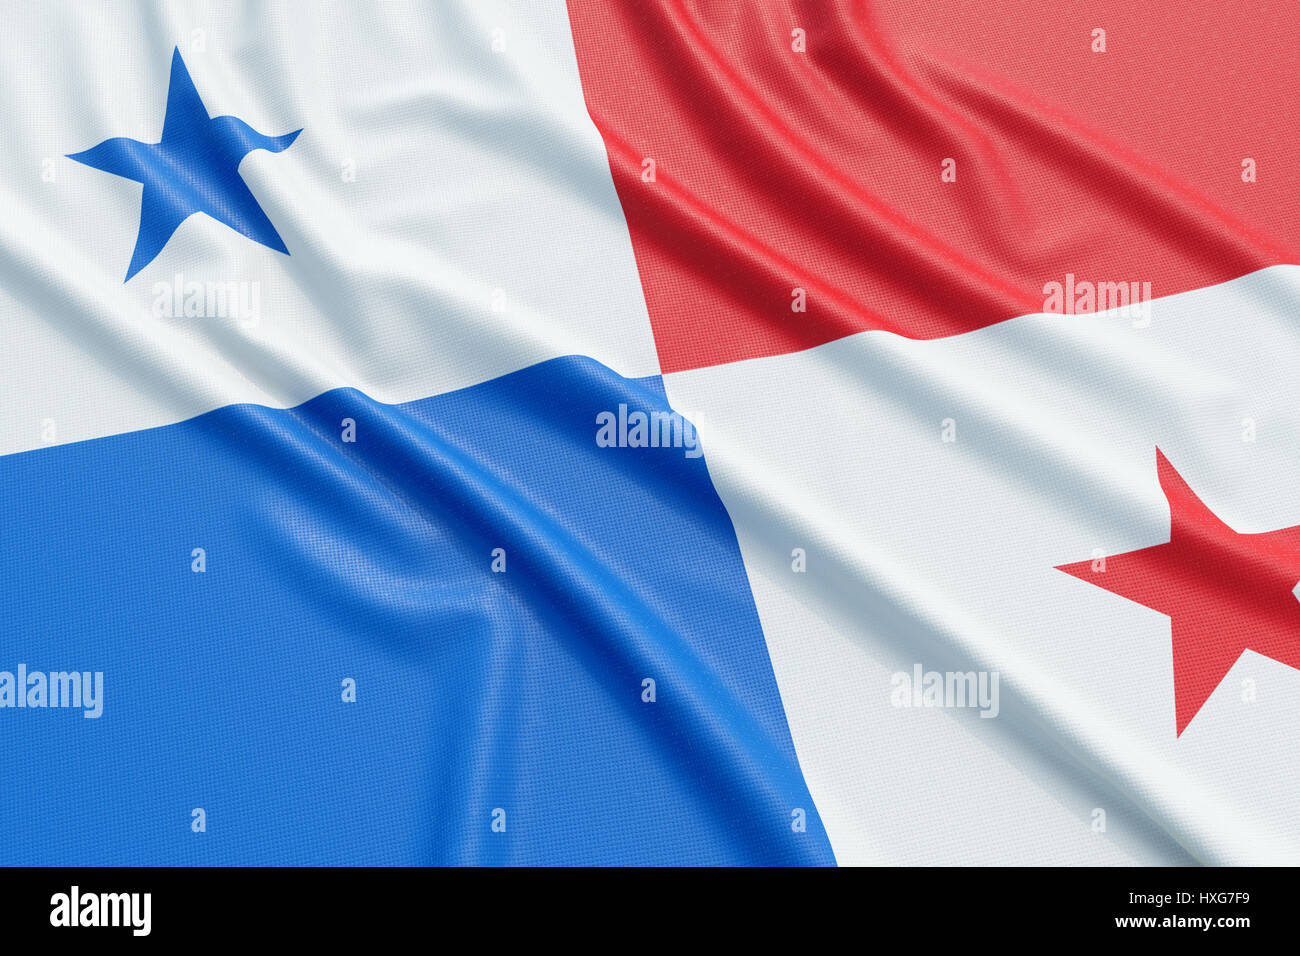 Panama flag. Wavy fabric high detailed texture. 3d illustration rendering Stock Photo